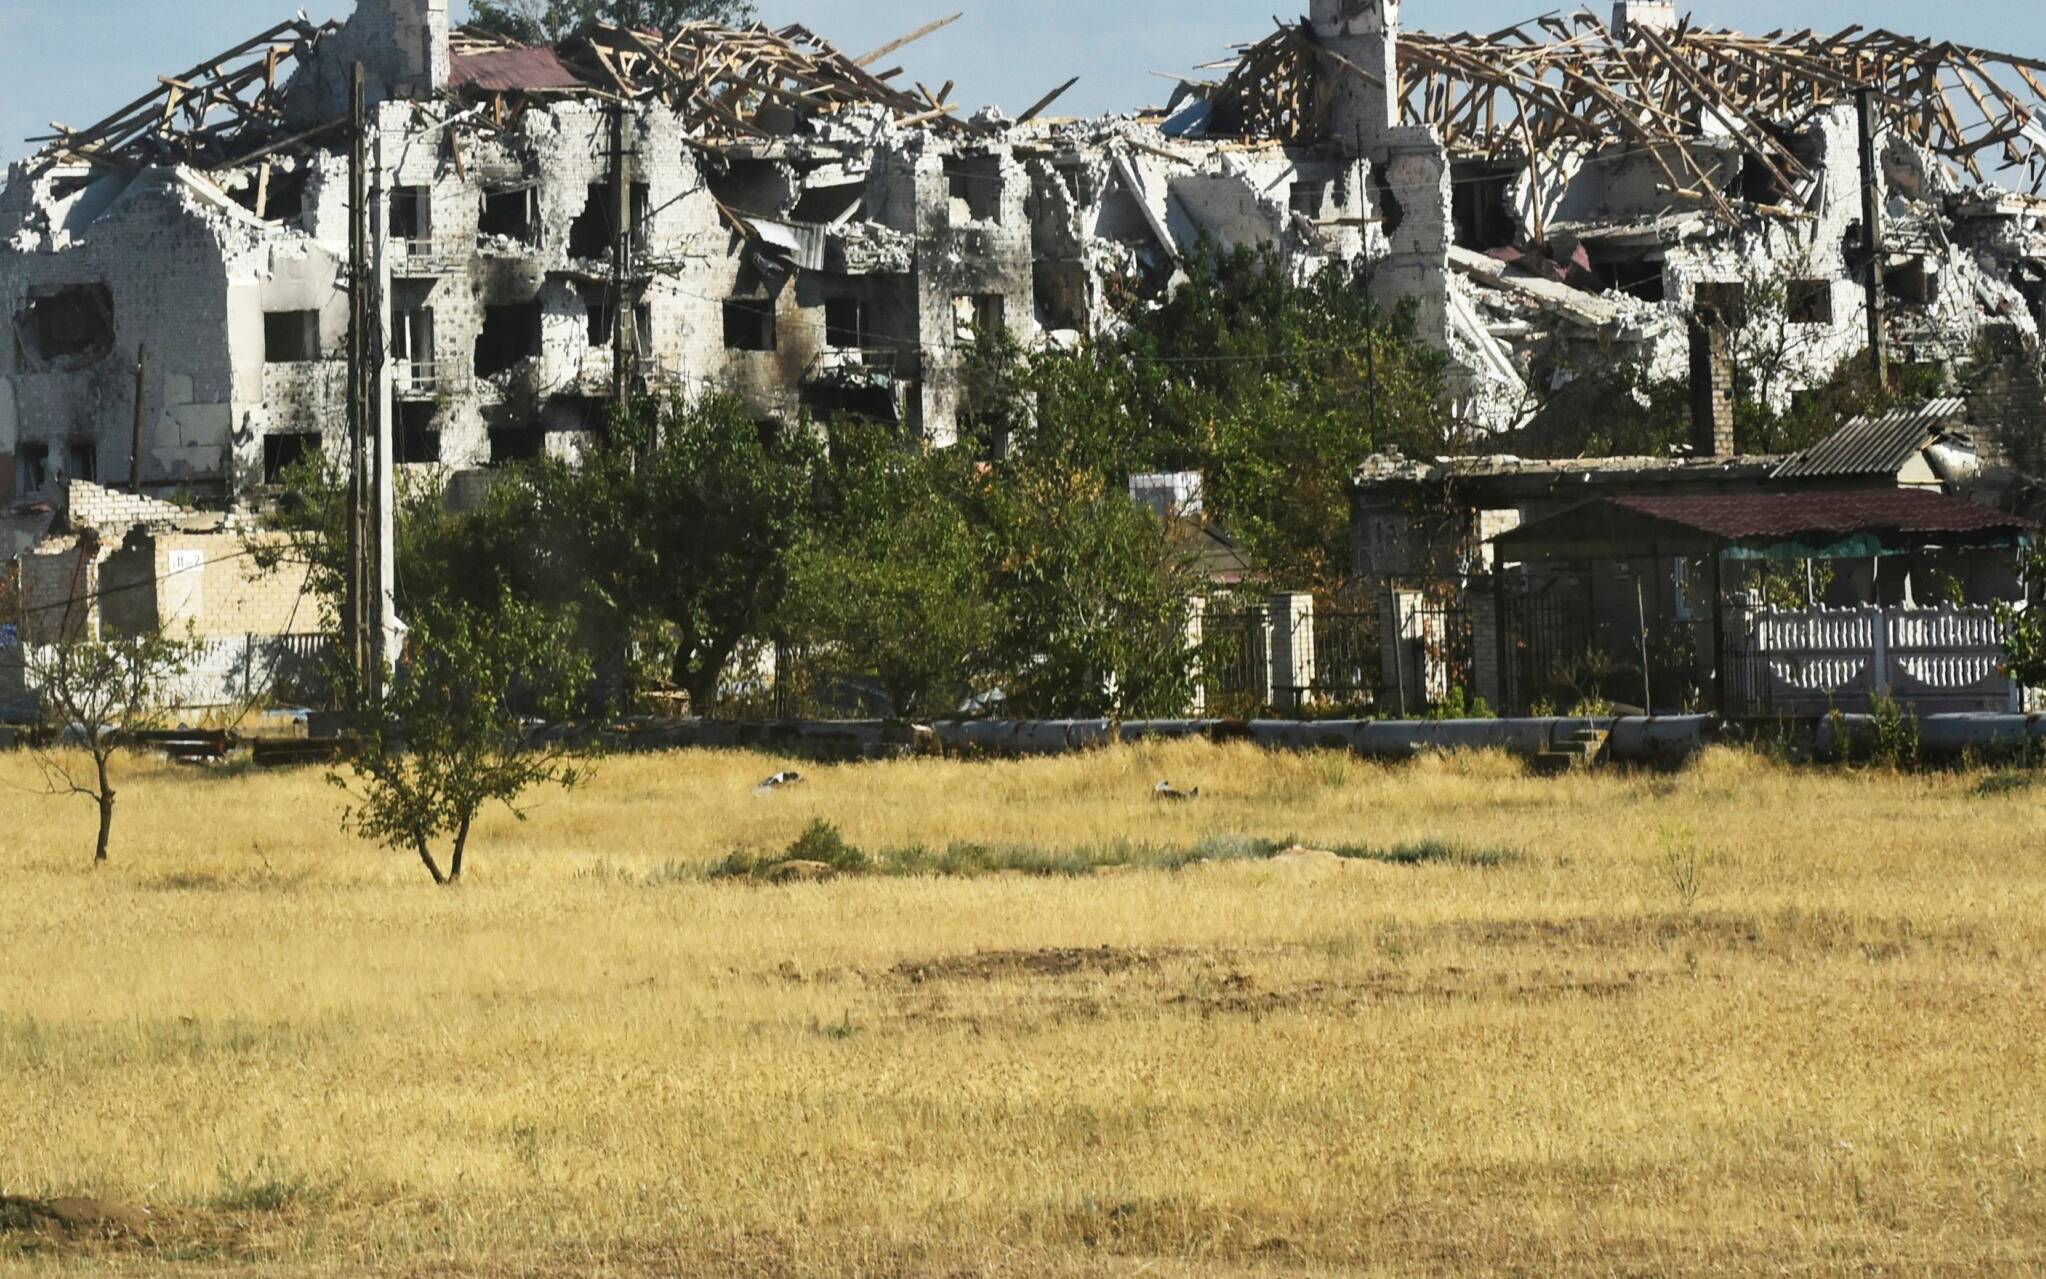 A view of the ruined city of Rubizhne on July 12, 2022, amid the ongoing Russian military action in Ukraine. (Photo by Olga MALTSEVA / AFP)